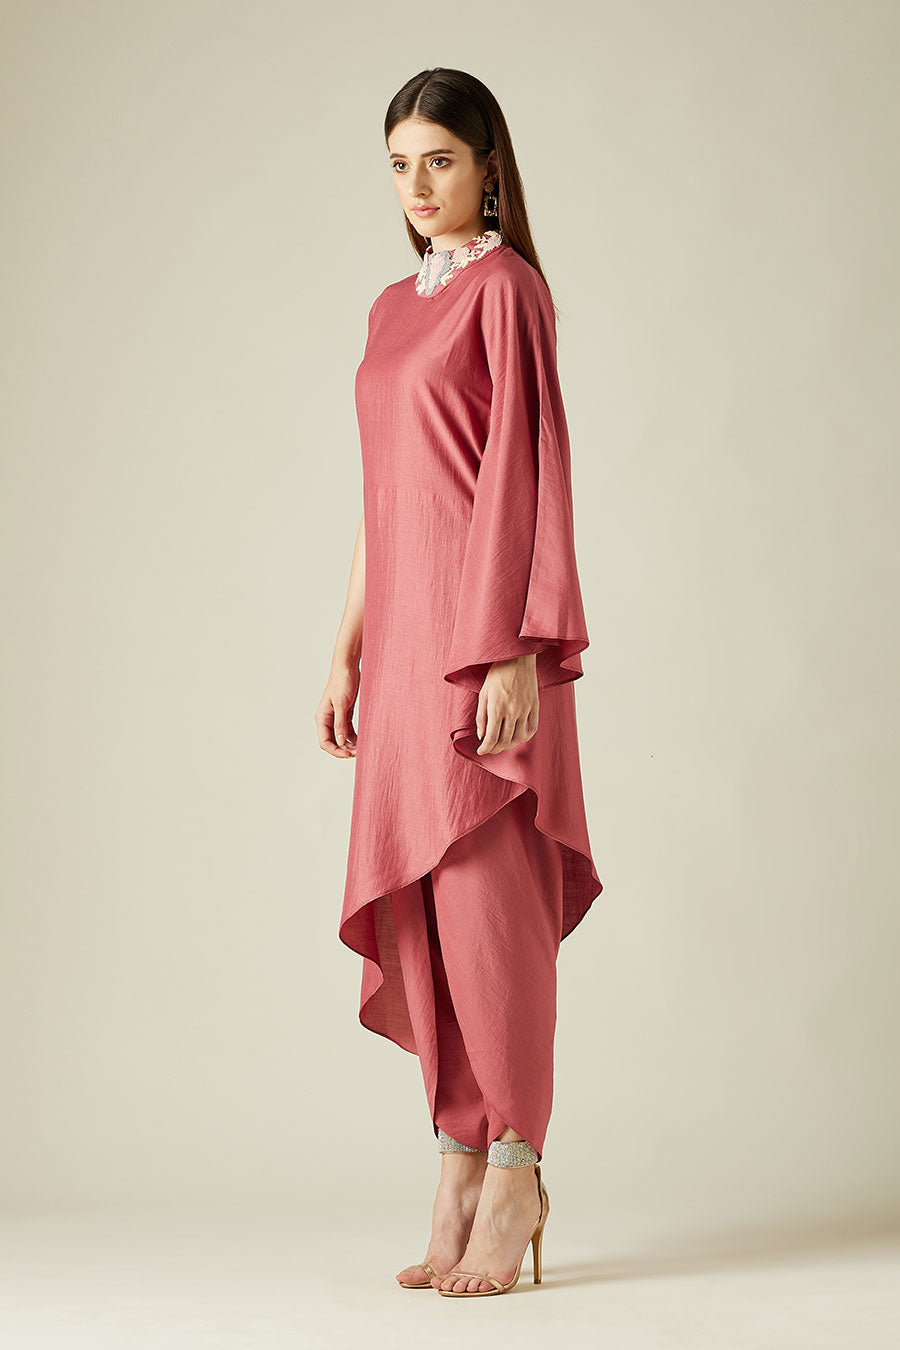 Garden Pink Tunic & Pant Co-Ord Set